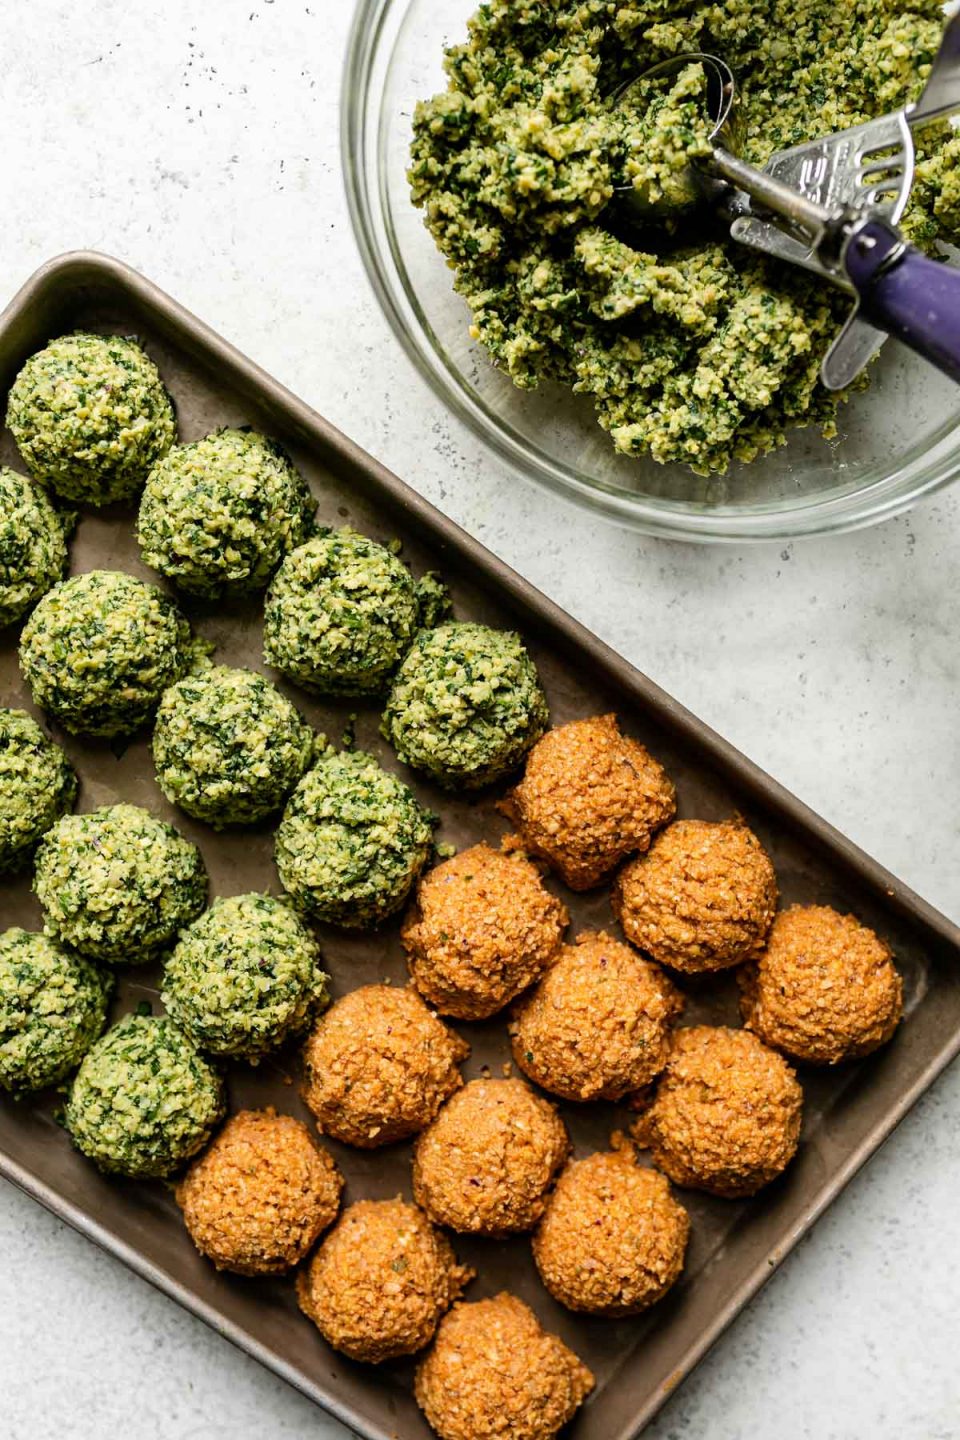 Herby green falafel mixture fills a clear glass mixing bowl. A spring-loaded 2-inch scoop rests inside of the bowl while a baking sheet sits alongside the bowl filled with four rows of four prepared herby green falafel balls and three rows of four spicy red harissa falafel balls. The baking sheet & mixing bowl sit atop a creamy white textured surface.